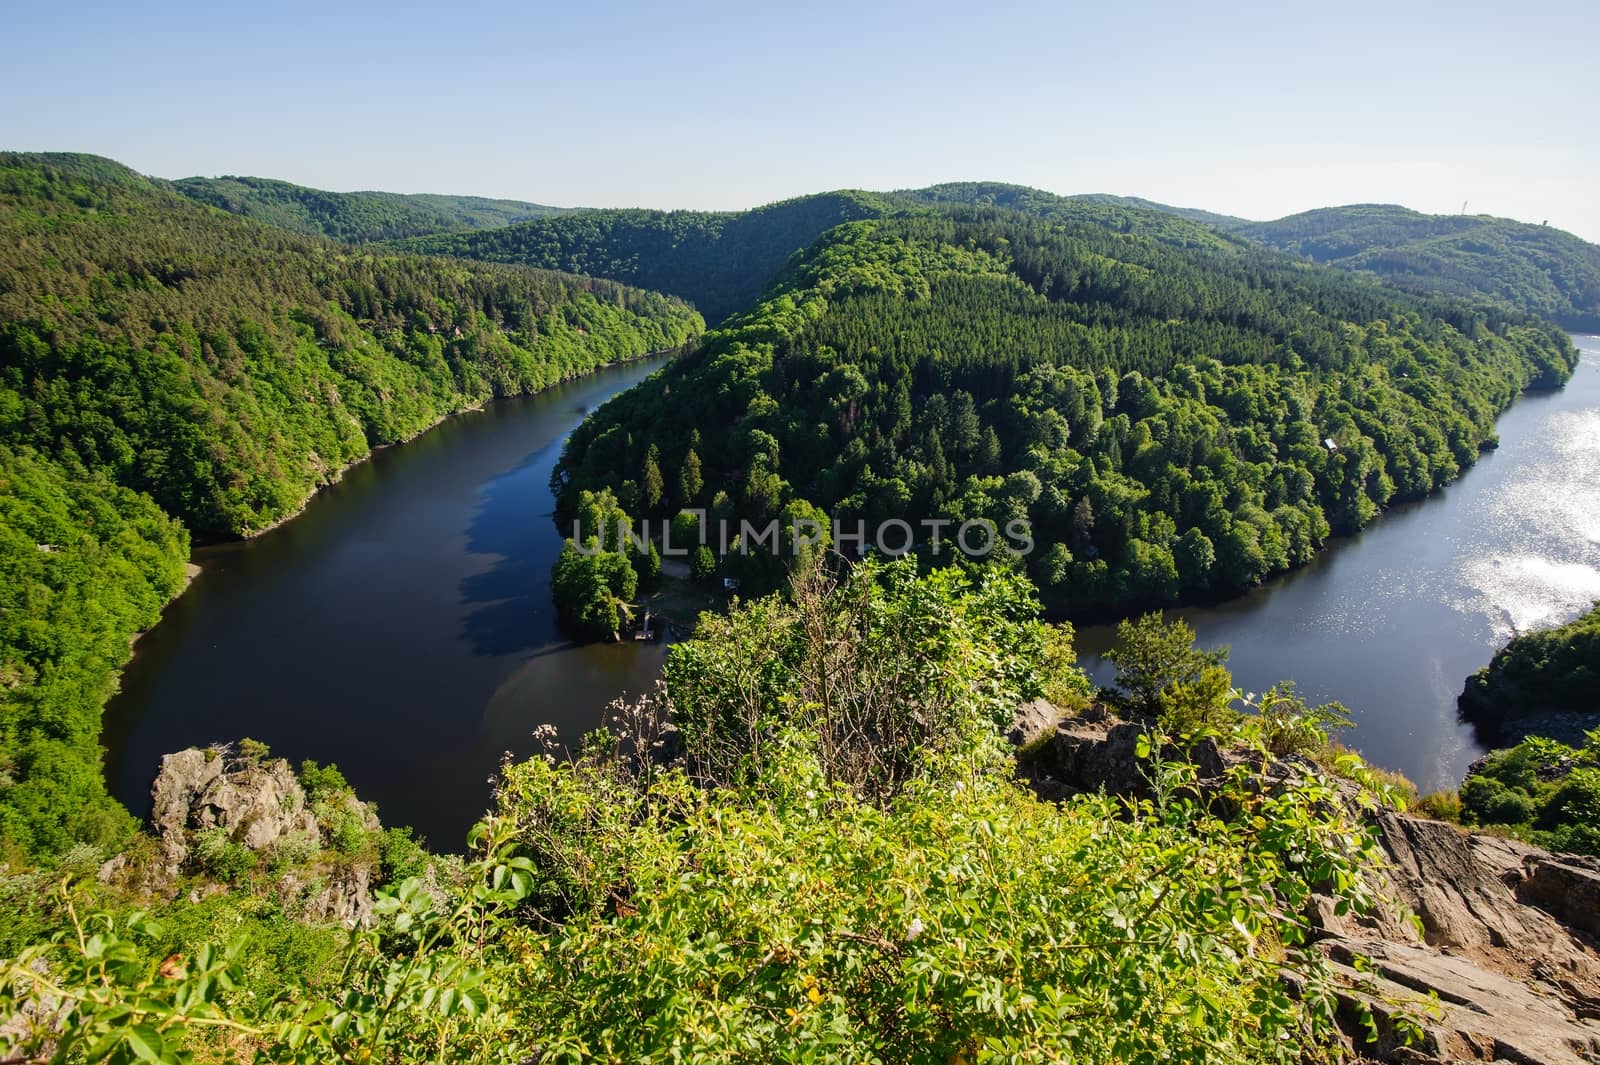 View of the Vltava river from the rock